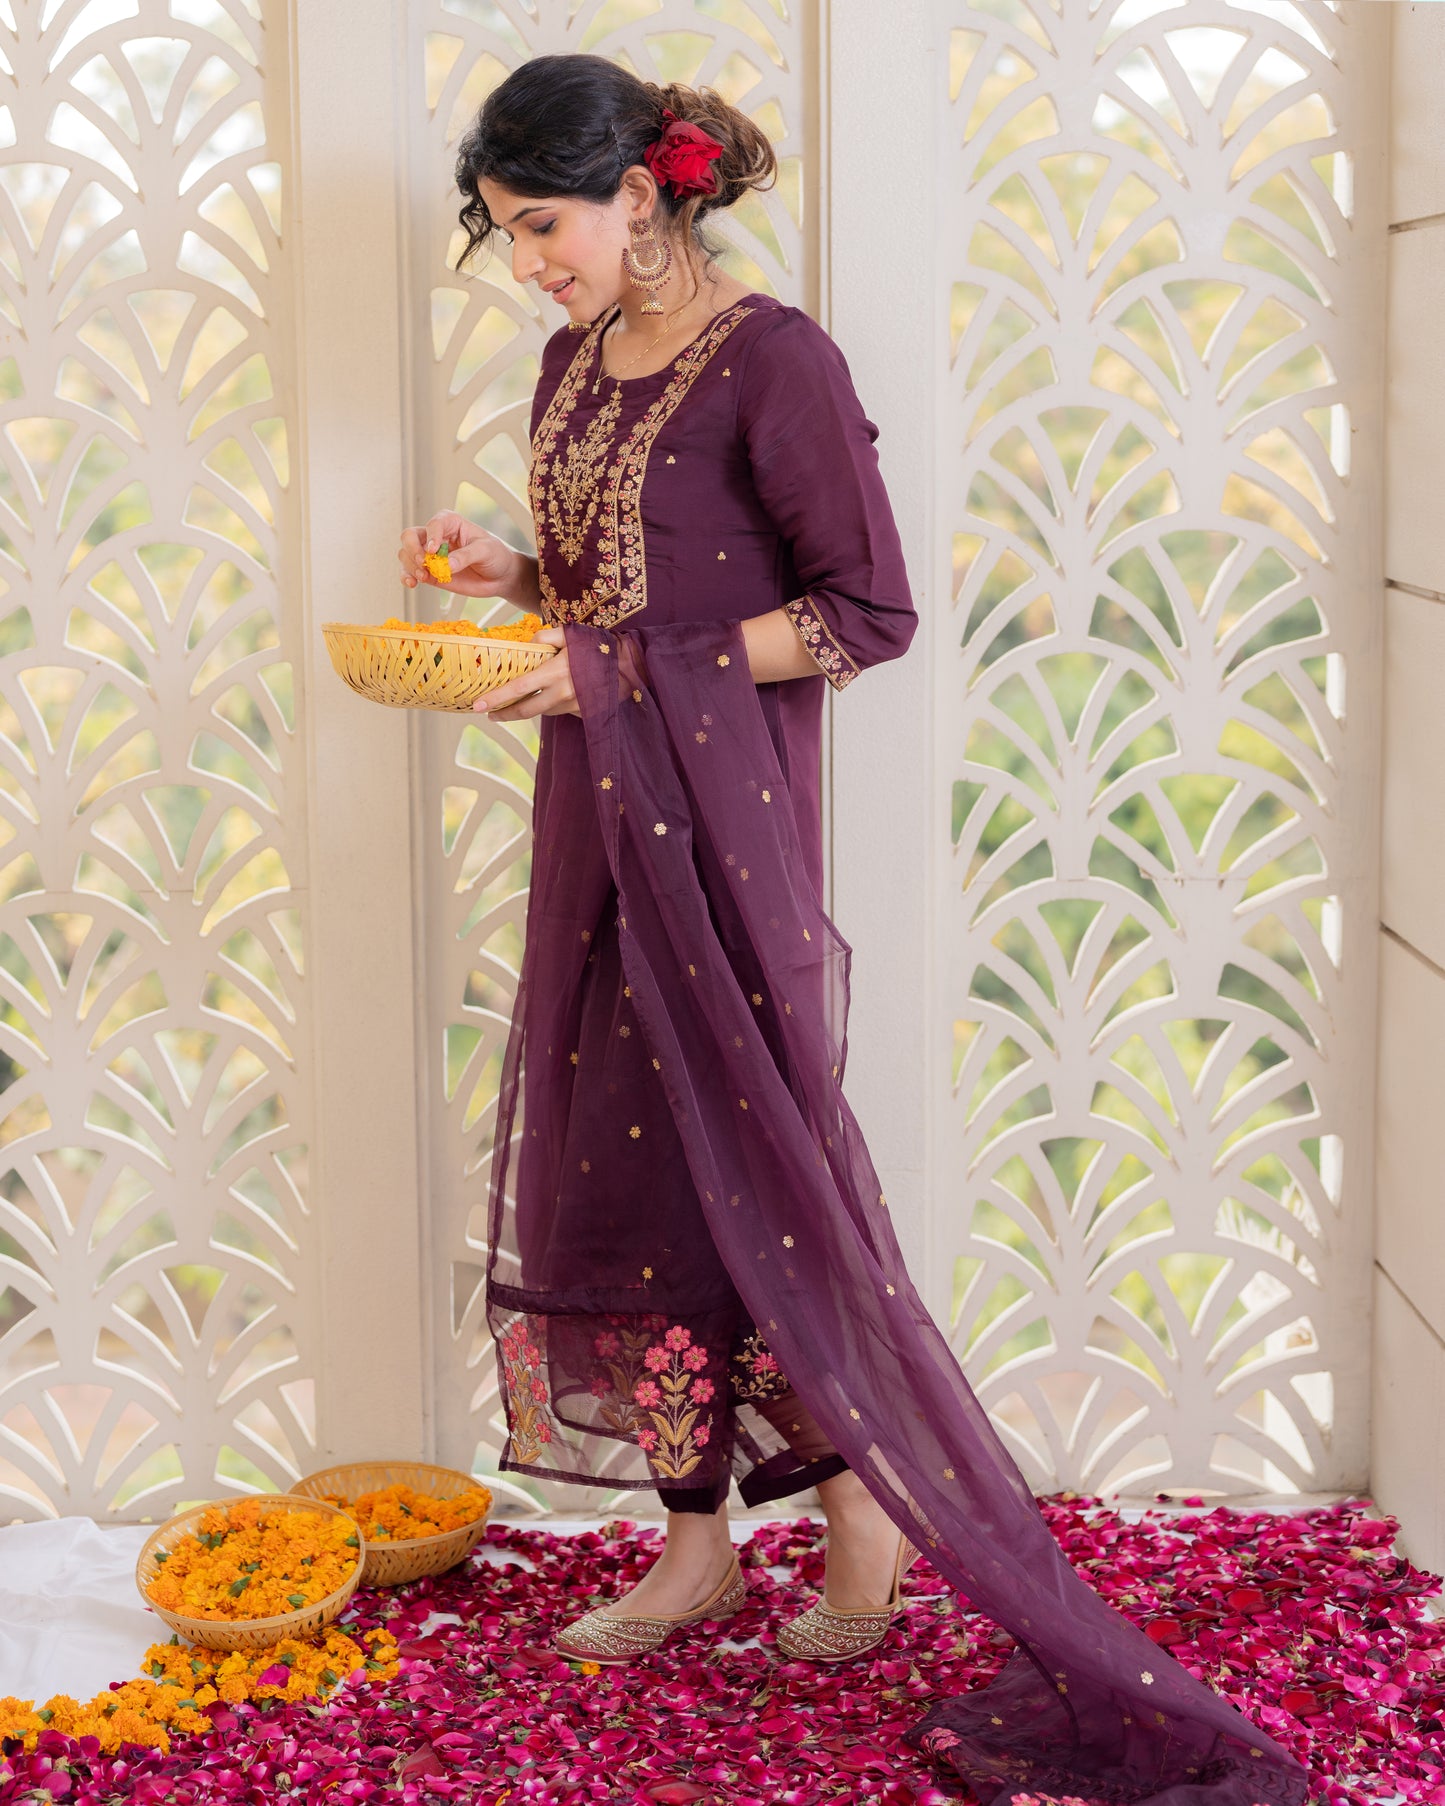 Plum Floral Embroidered Kurta With Trousers And Dupatta